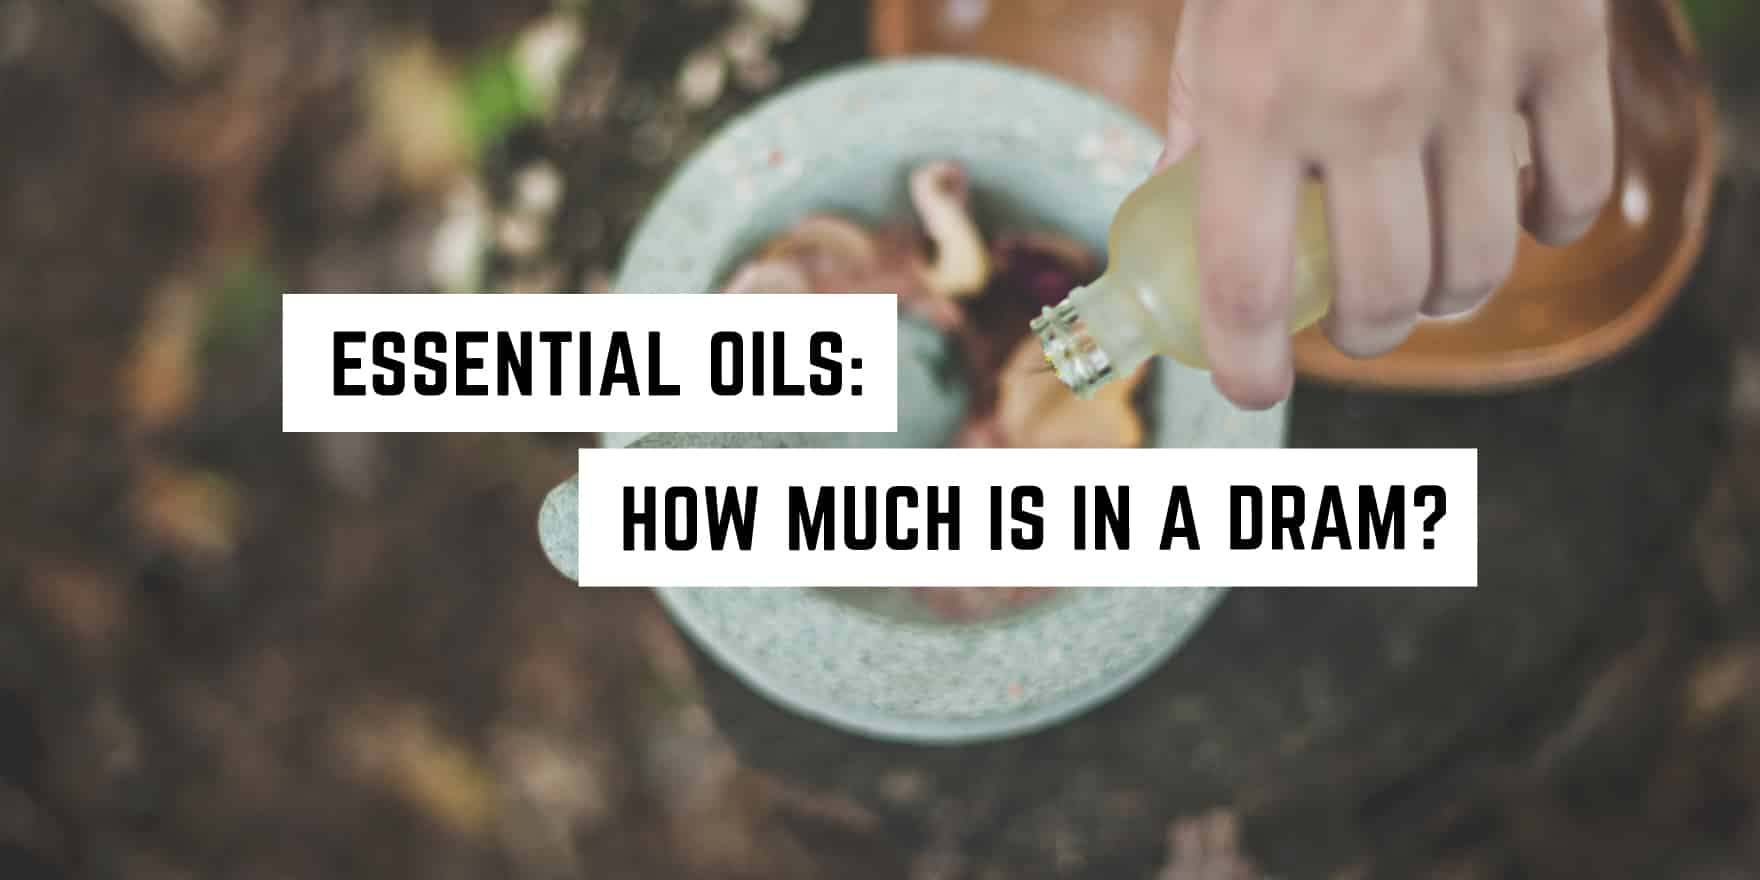 Essential Oils: How much is a dram?